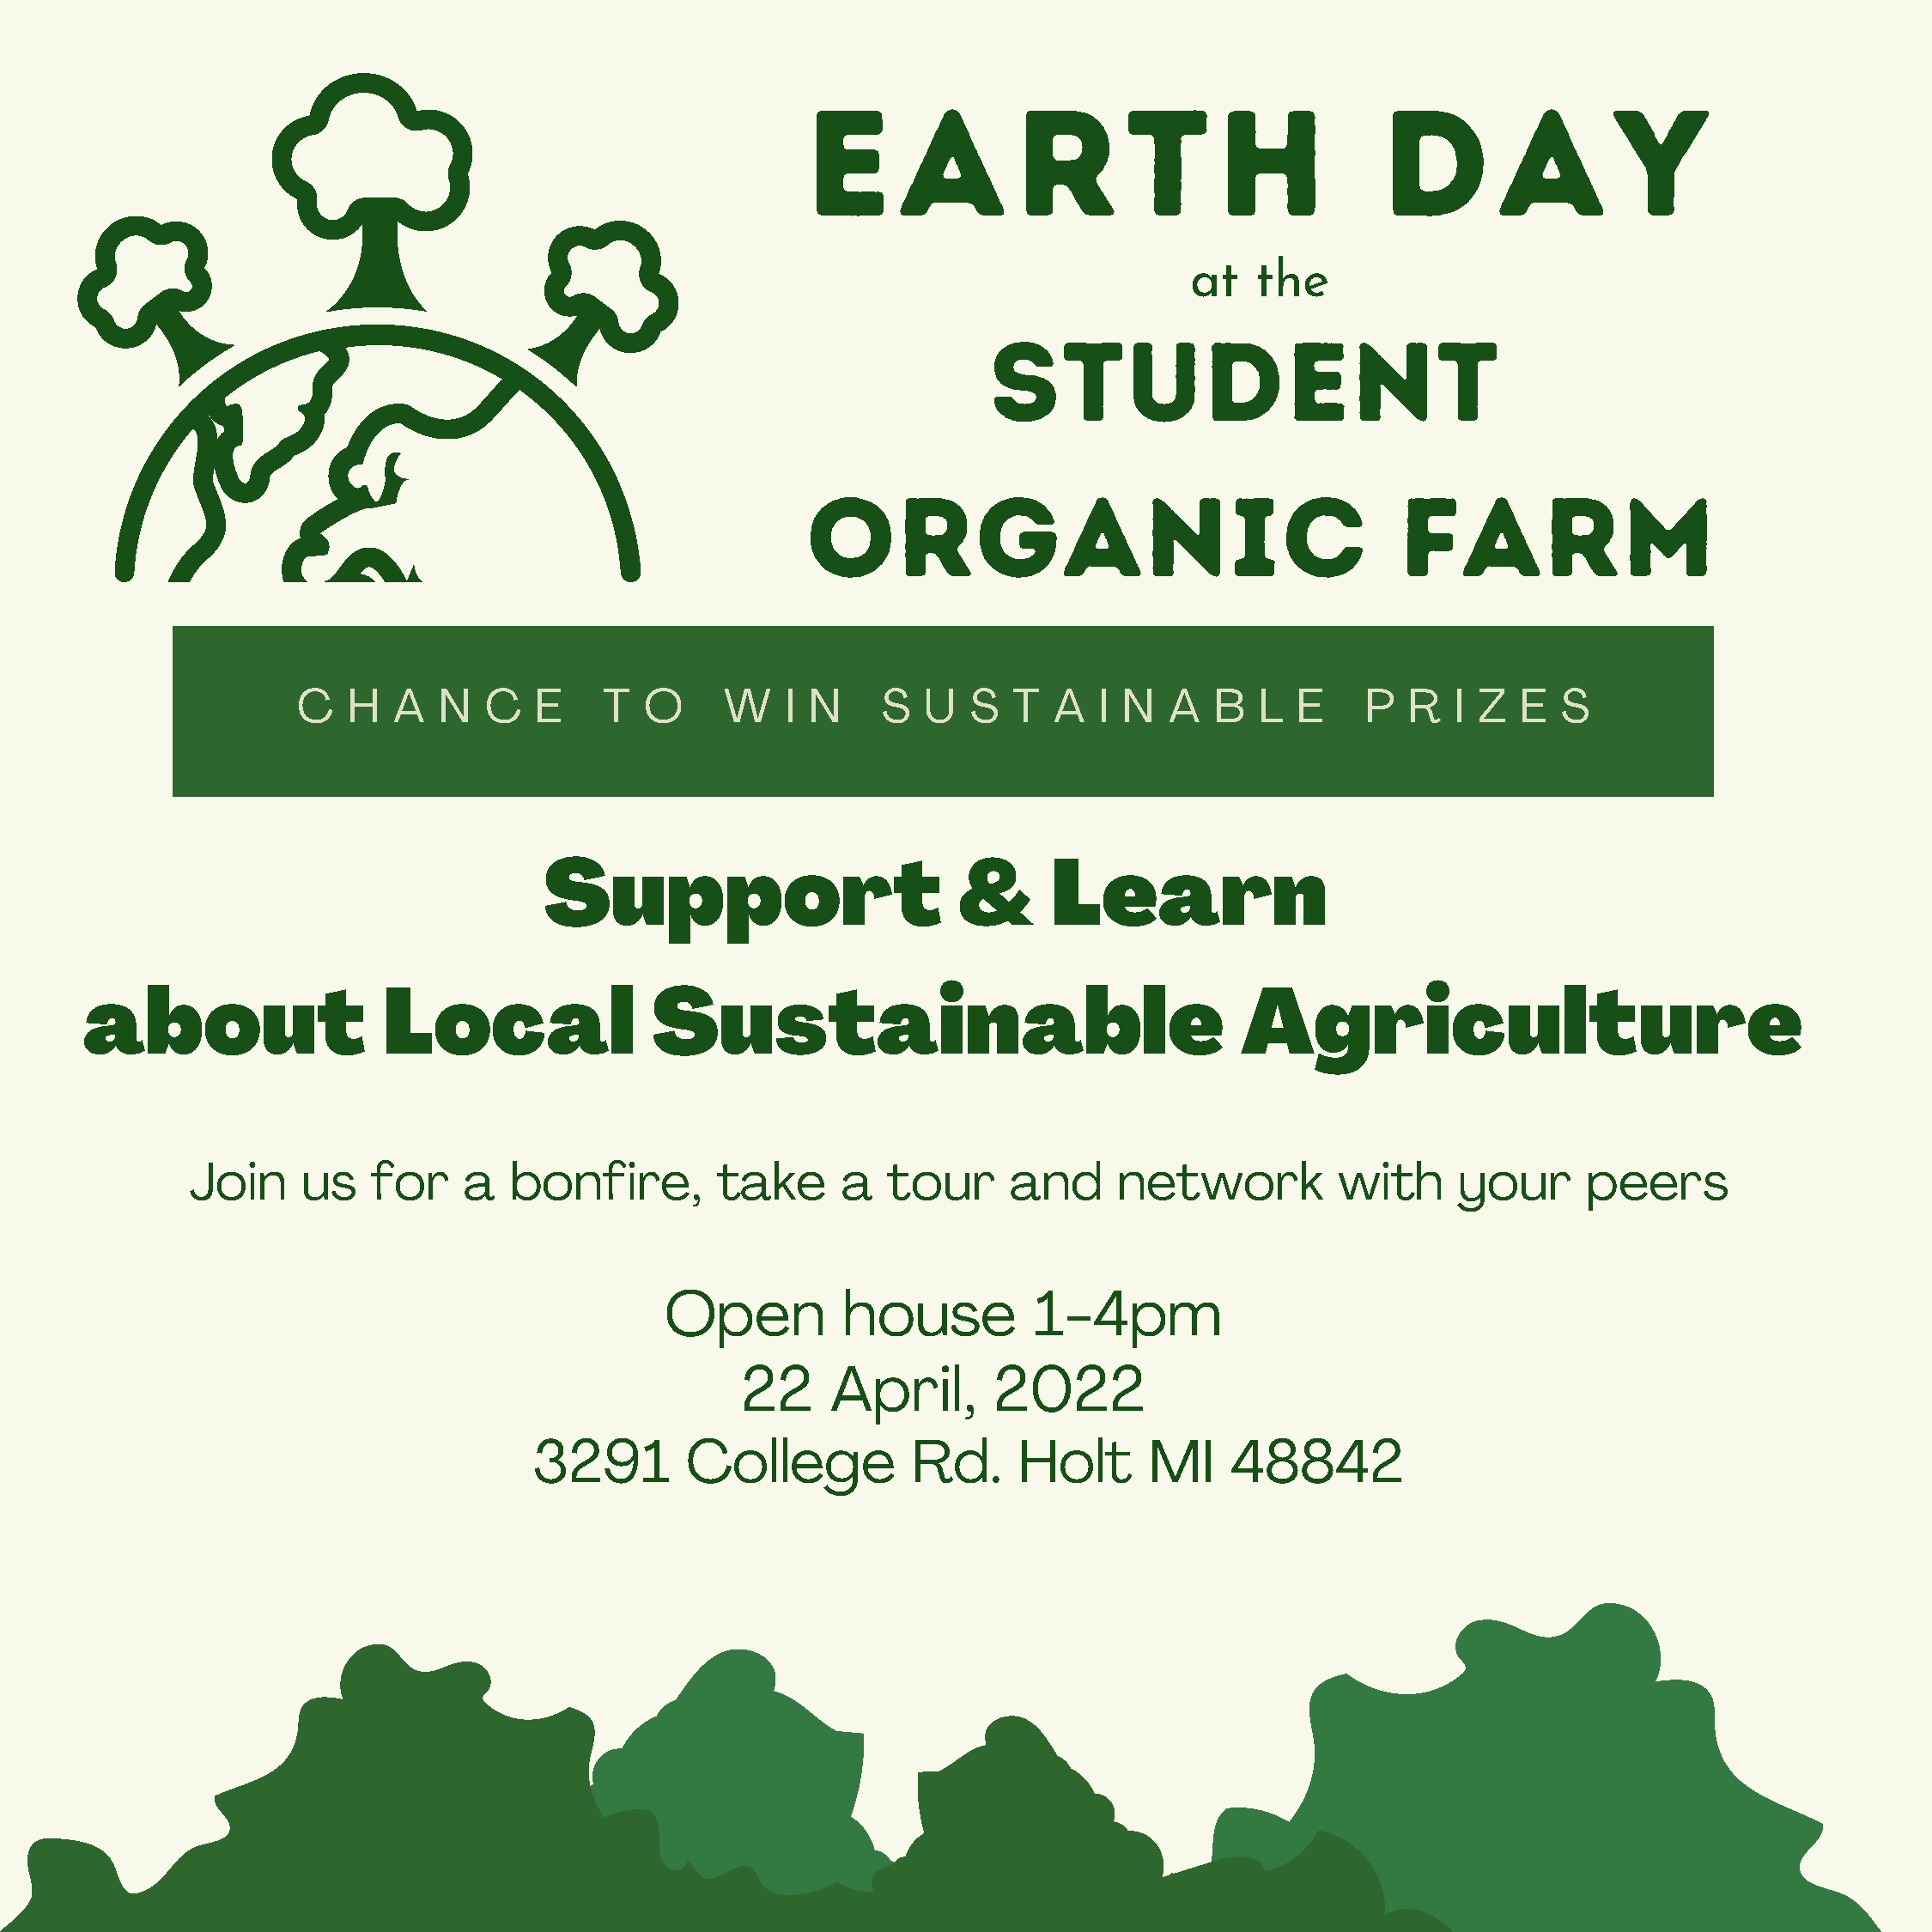 Earth Day at the Student Organic Farm Chance to Win Sustainable Prizes. Support and Learn about Local Sustainable Agriculture. Join us for a bonfire, take a tour and network with your peers. Open house 1 - 4 pm. 22 April, 2022. 3291 College Rd Holt MI 48842.